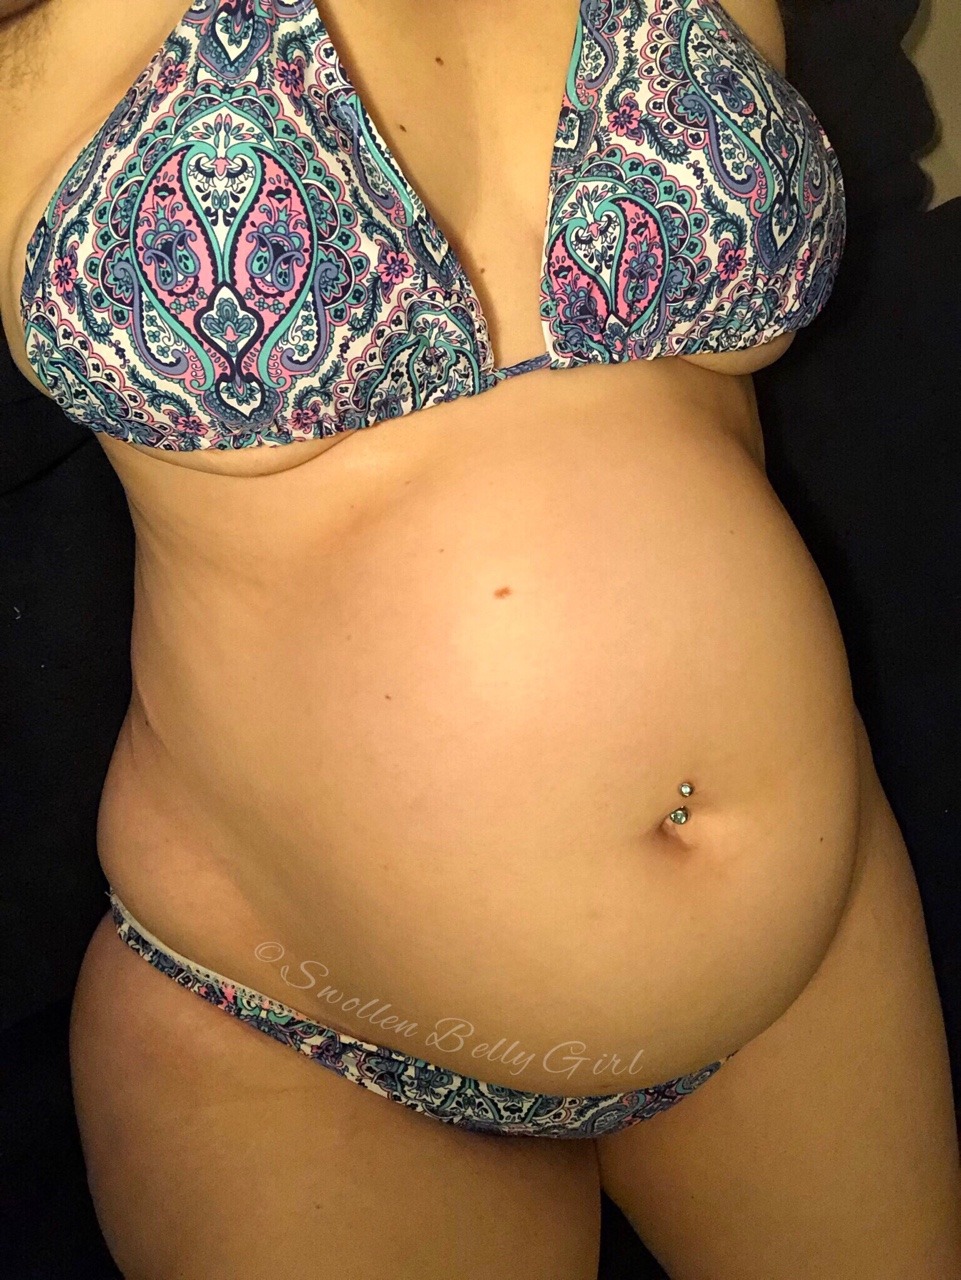 Big belly girl pictures